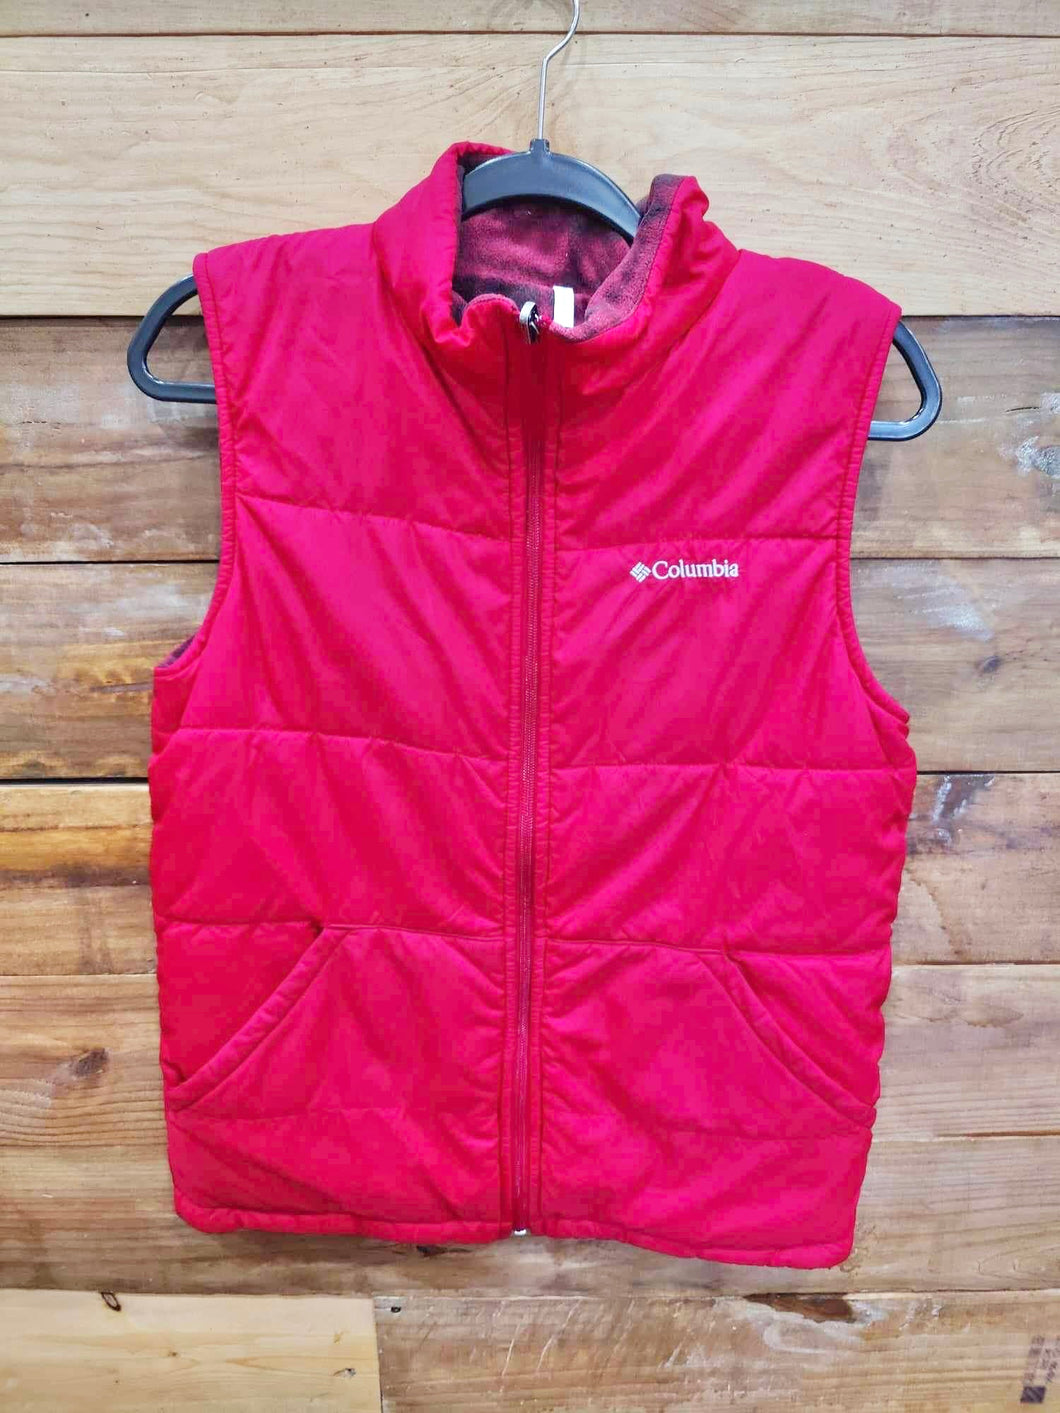 Columbia Red Reversible Vest Size 18-20